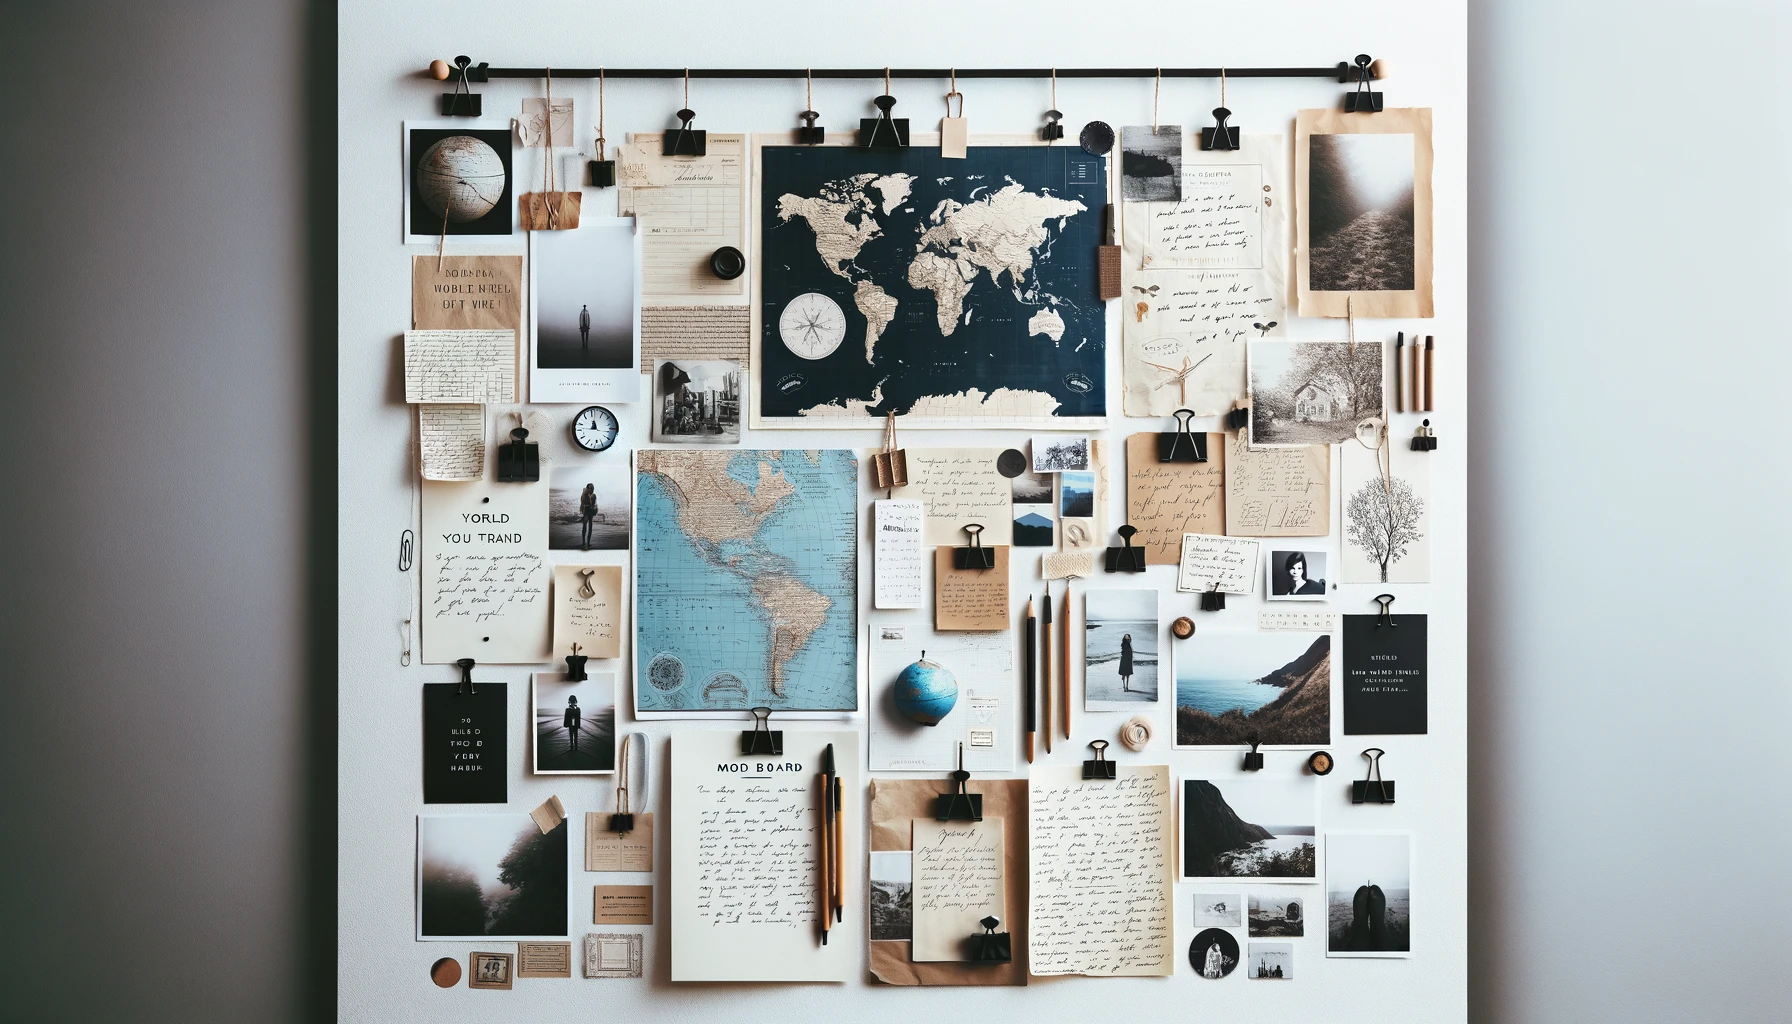 A mood board with maps and notes.